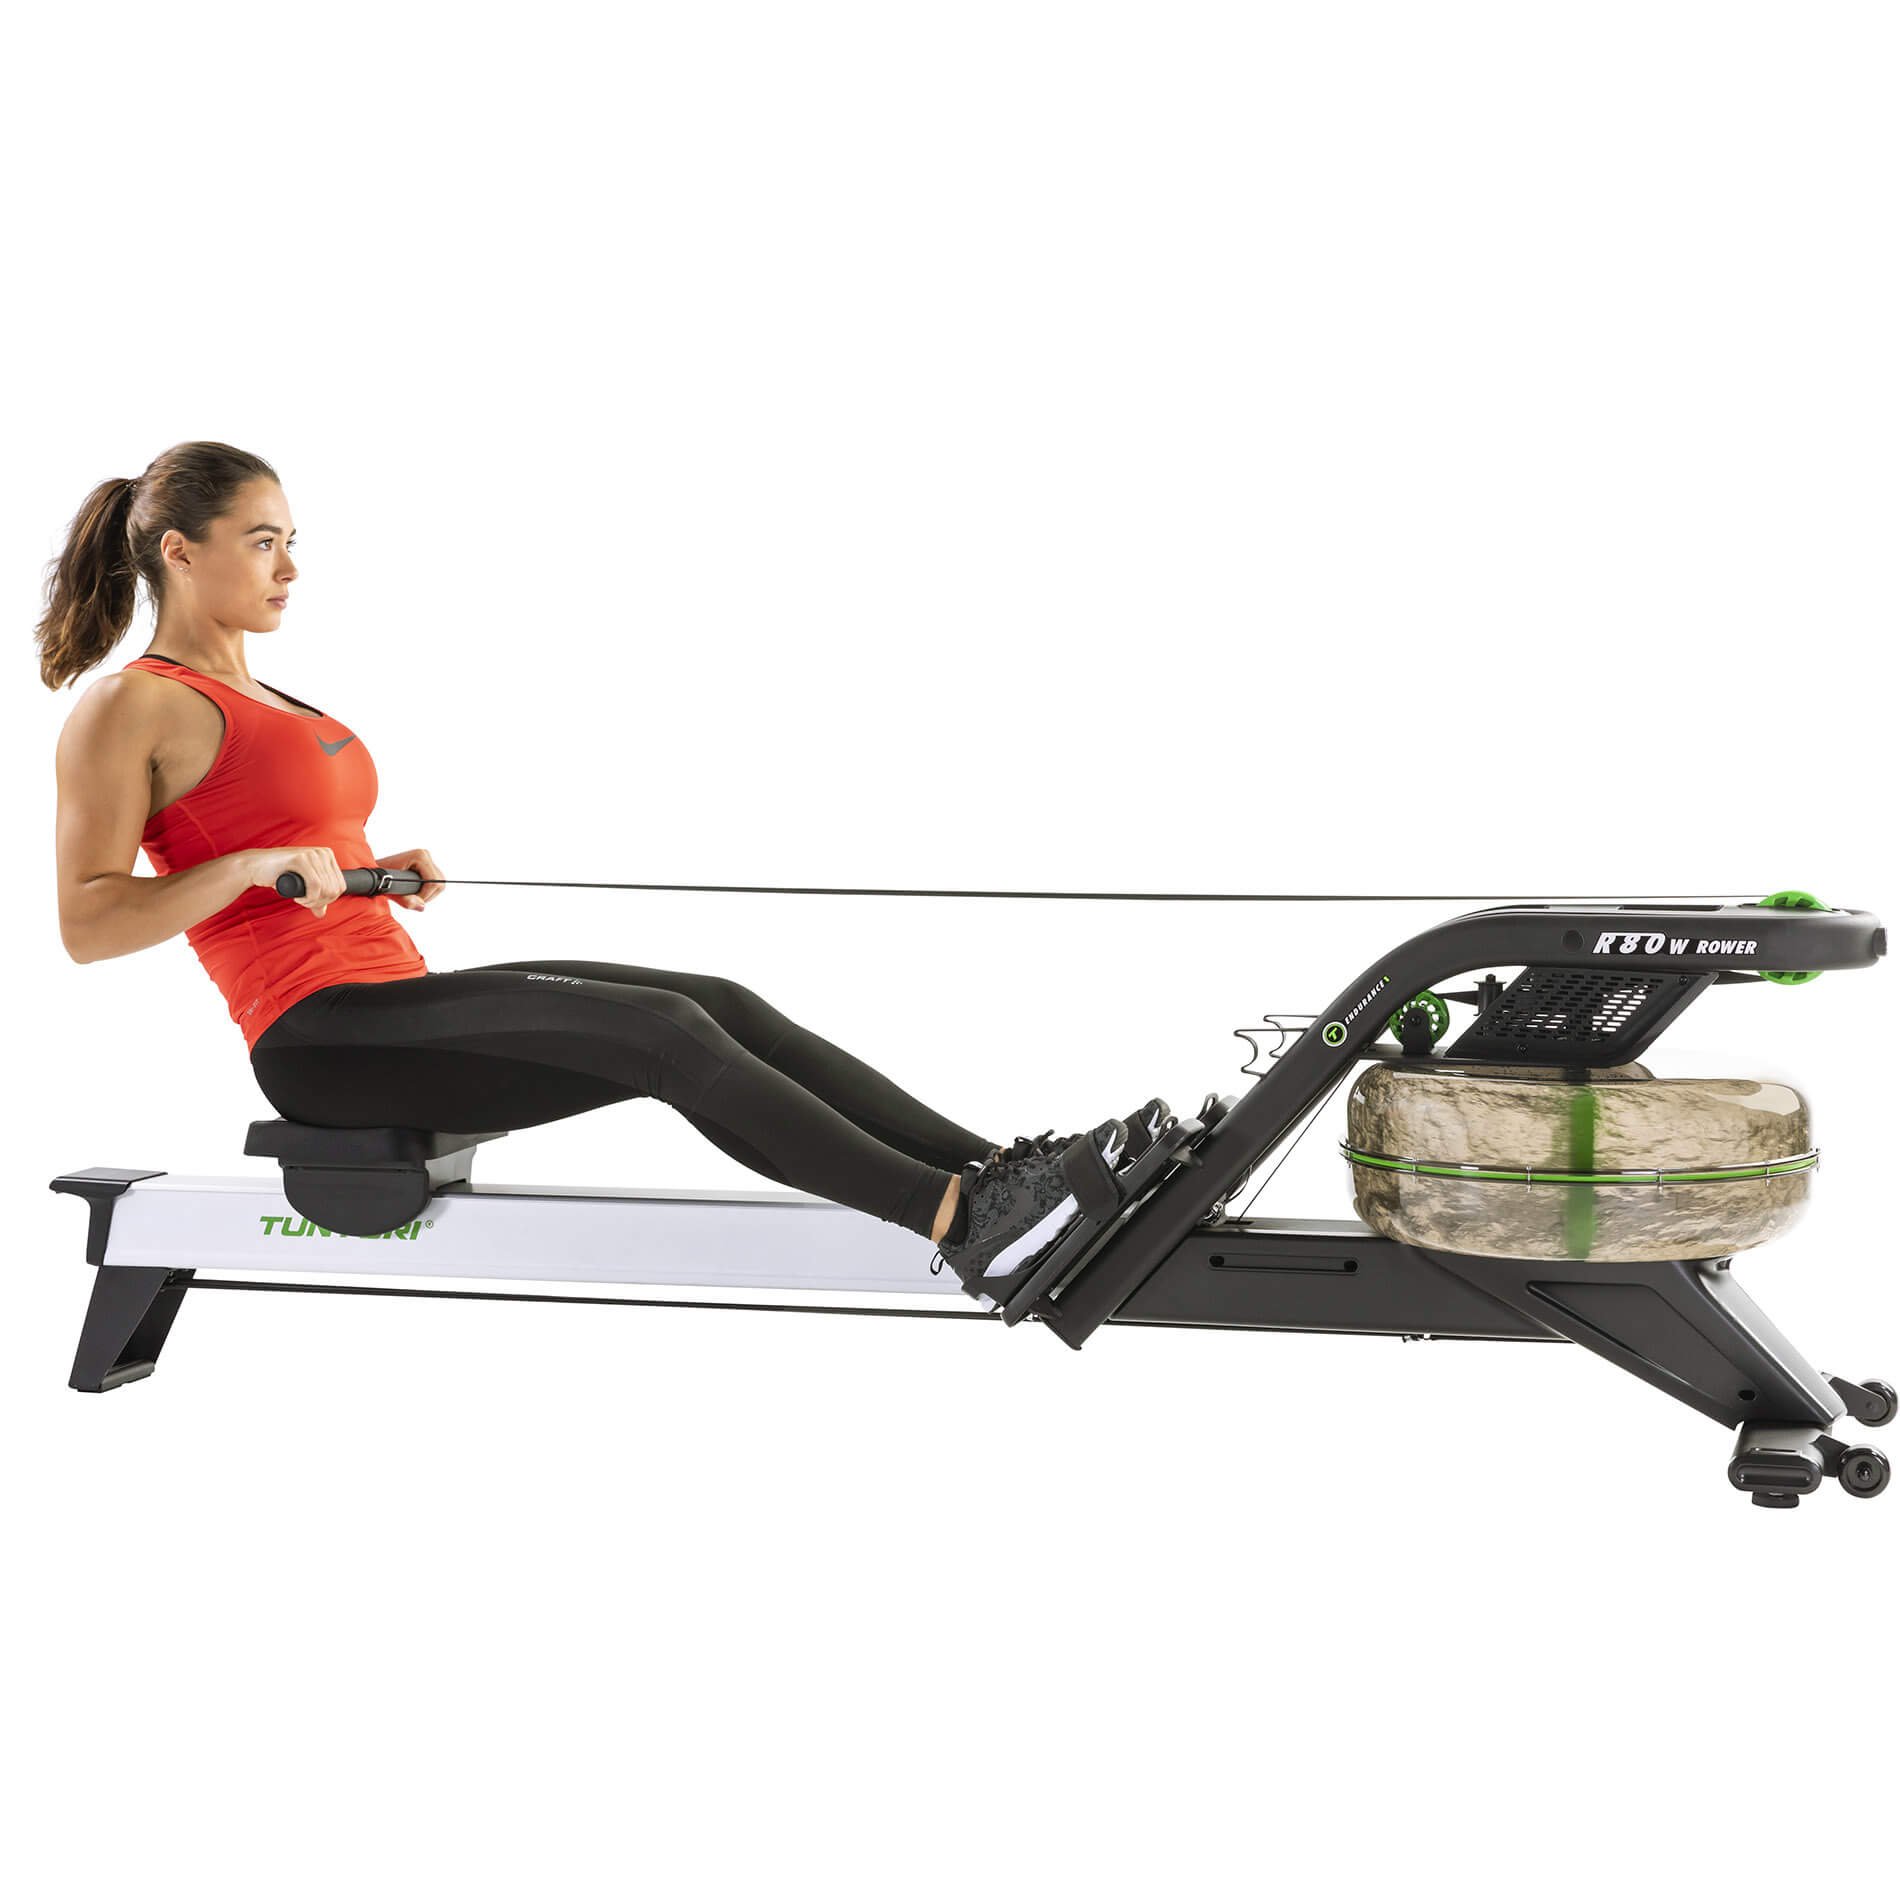 Rowing Machine vs Treadmill for Weight Loss